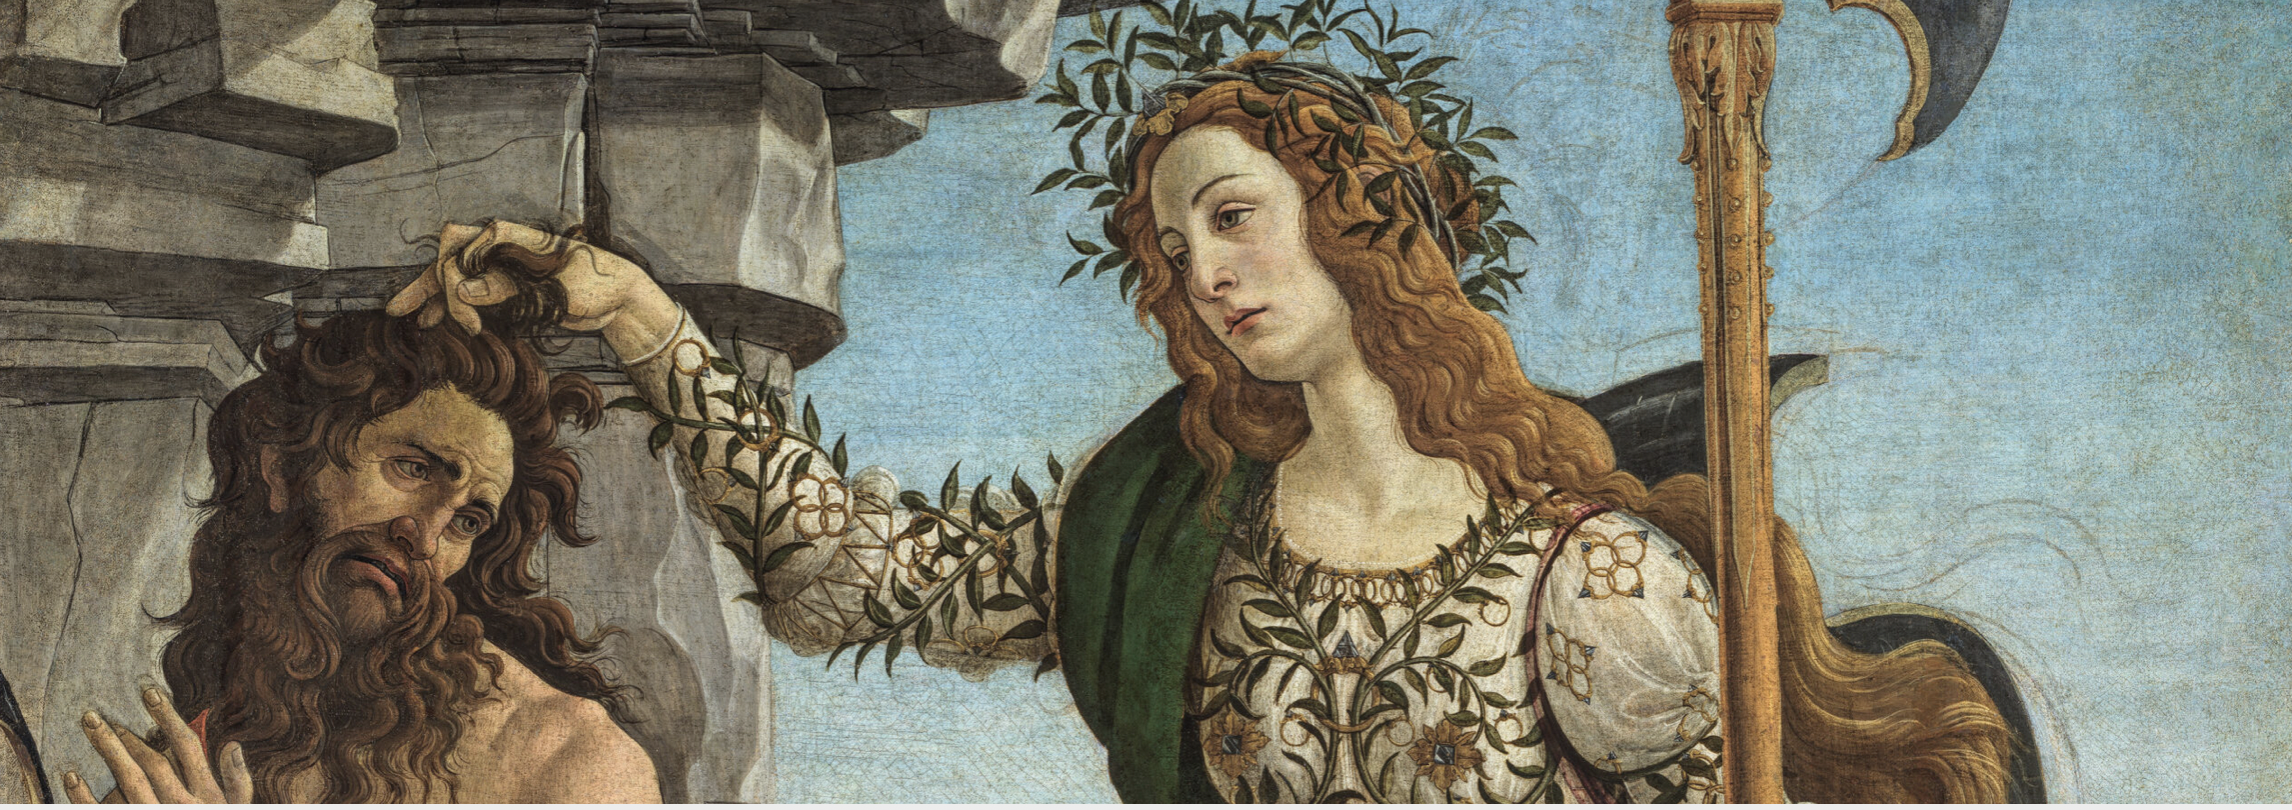 Detail of Botticelli painting from the Mia website.